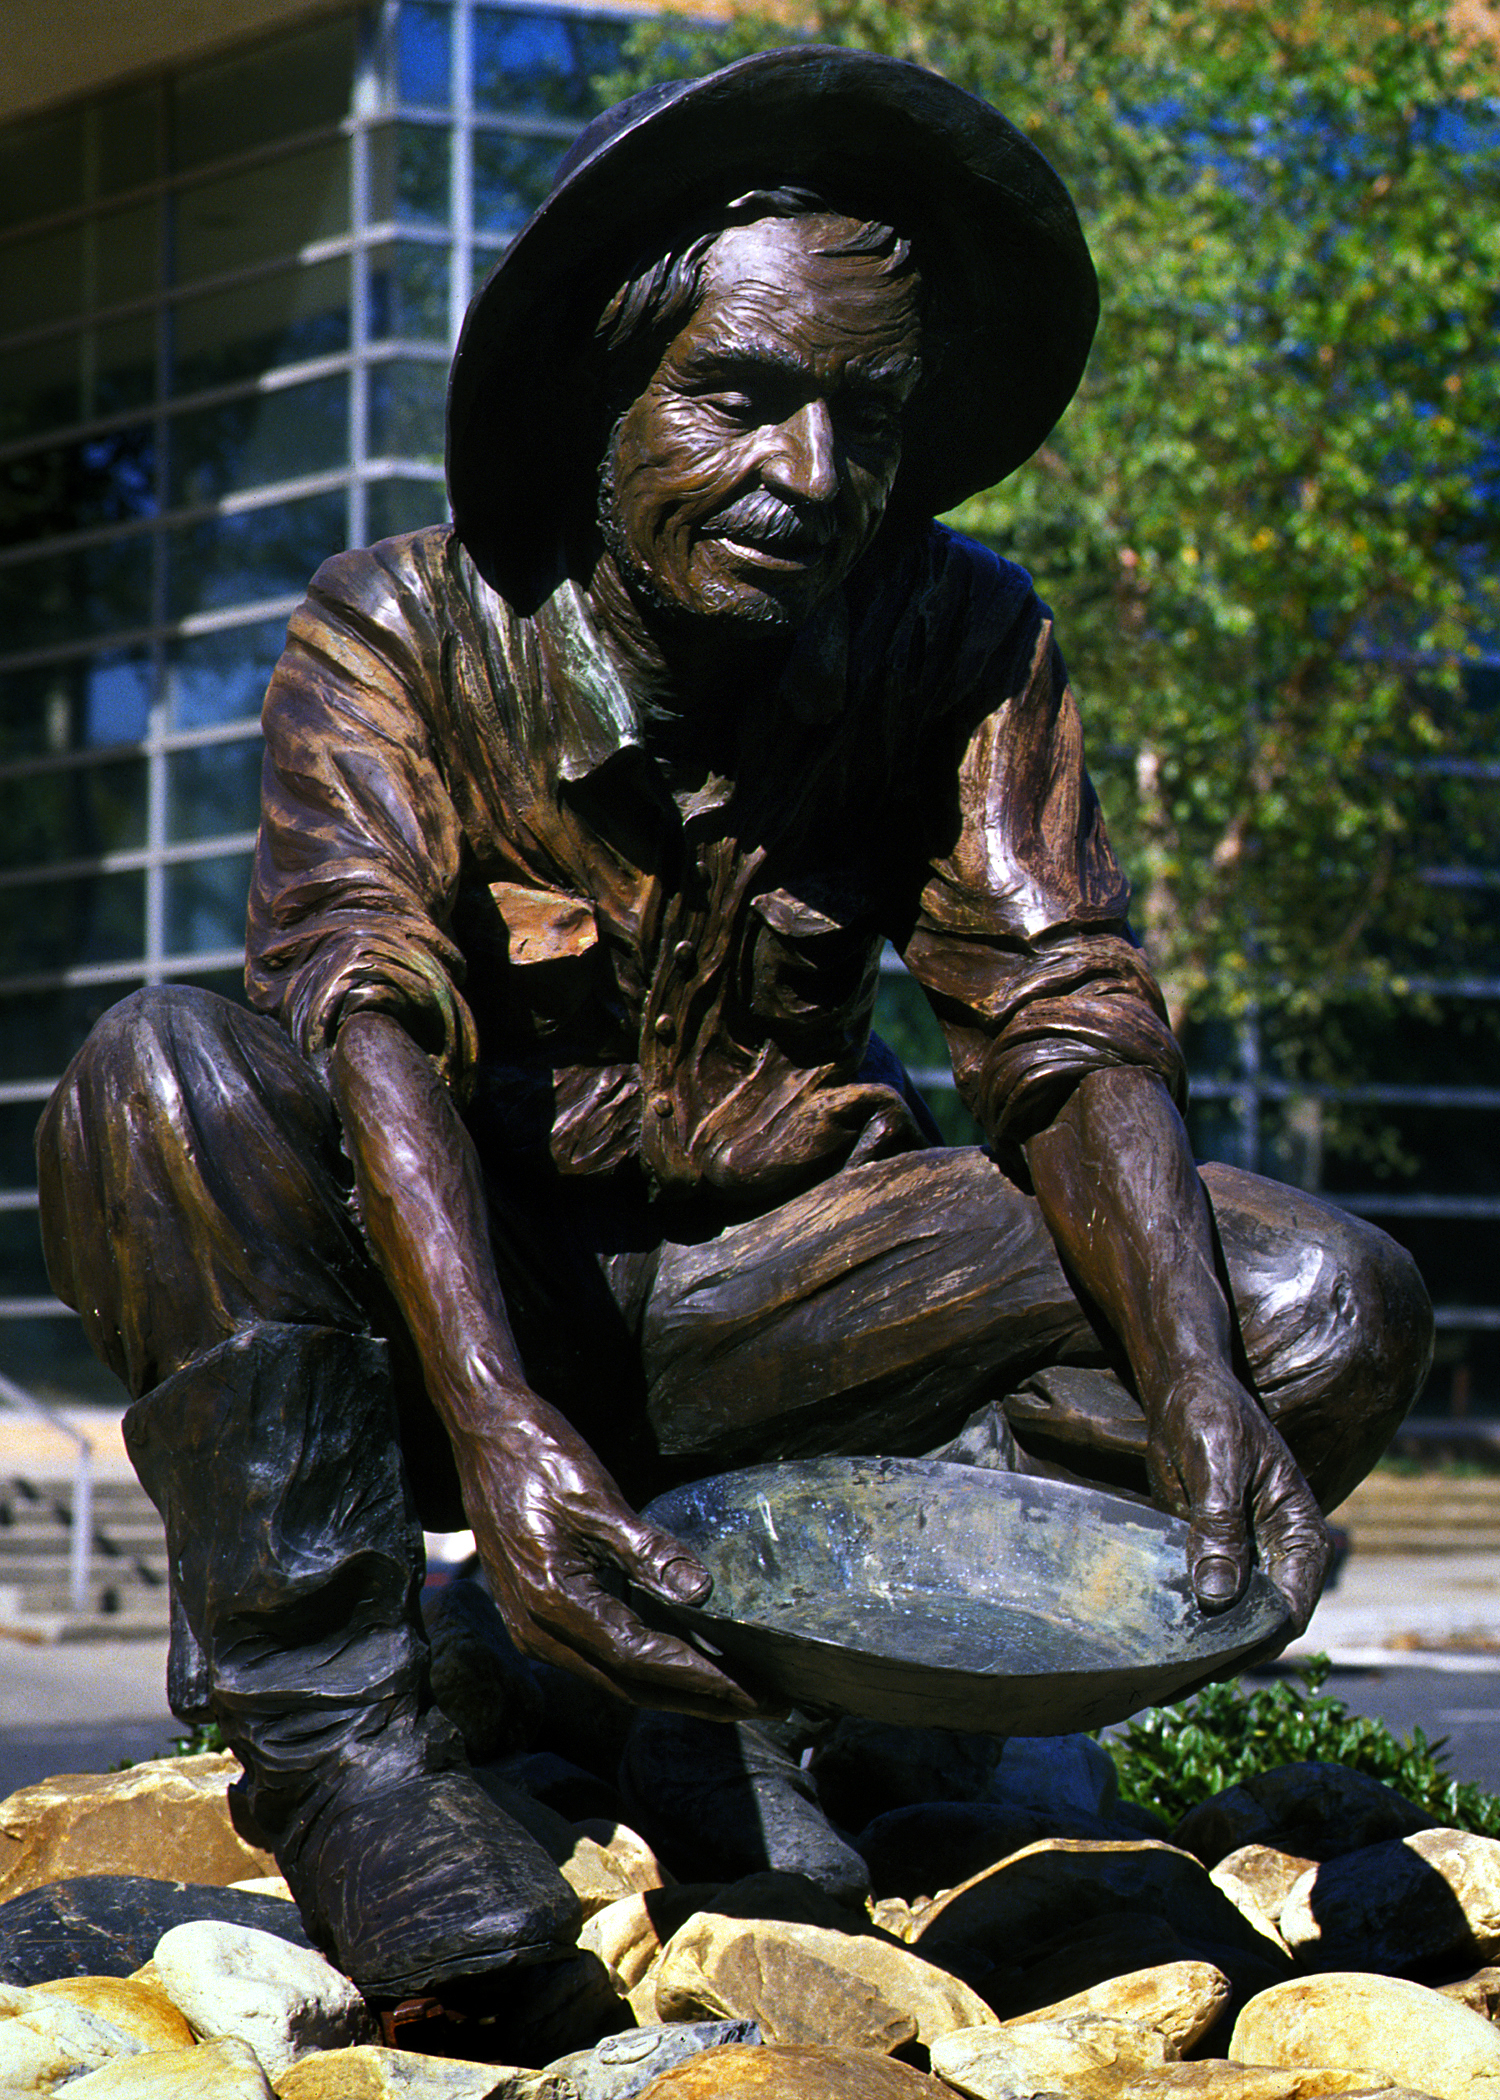 The 49er Miner statue at its original location, with the Reese Building in the background, 2006.